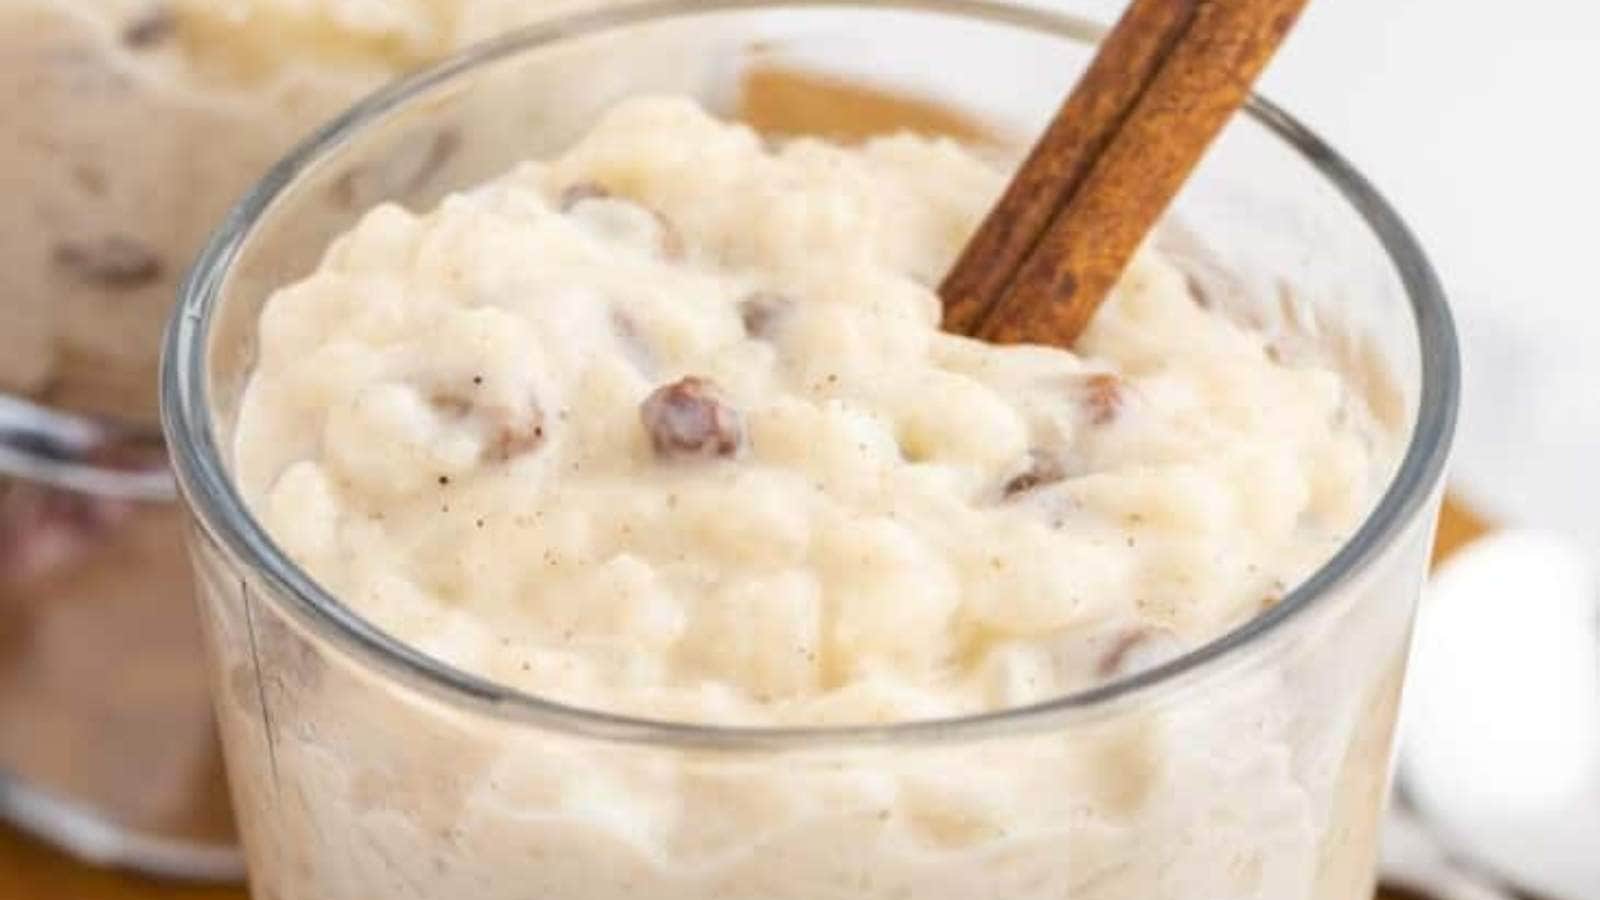 Old Fashioned Rice Pudding recipe by Little Suny Kitchen.